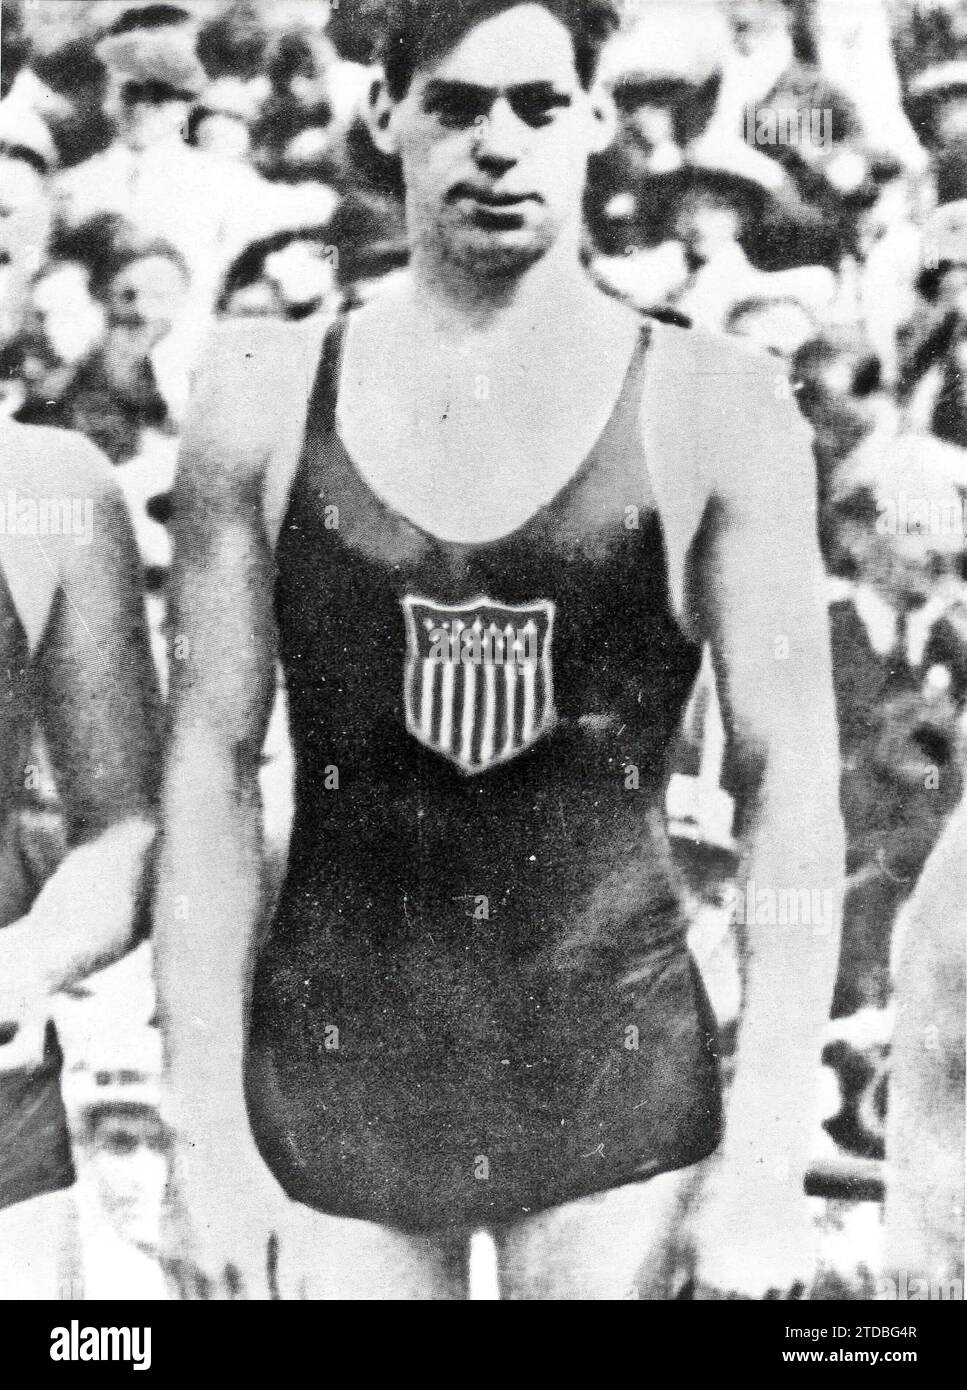 Johny Weissmuller at the 1924 Paris Olympics. He won three golds in ...